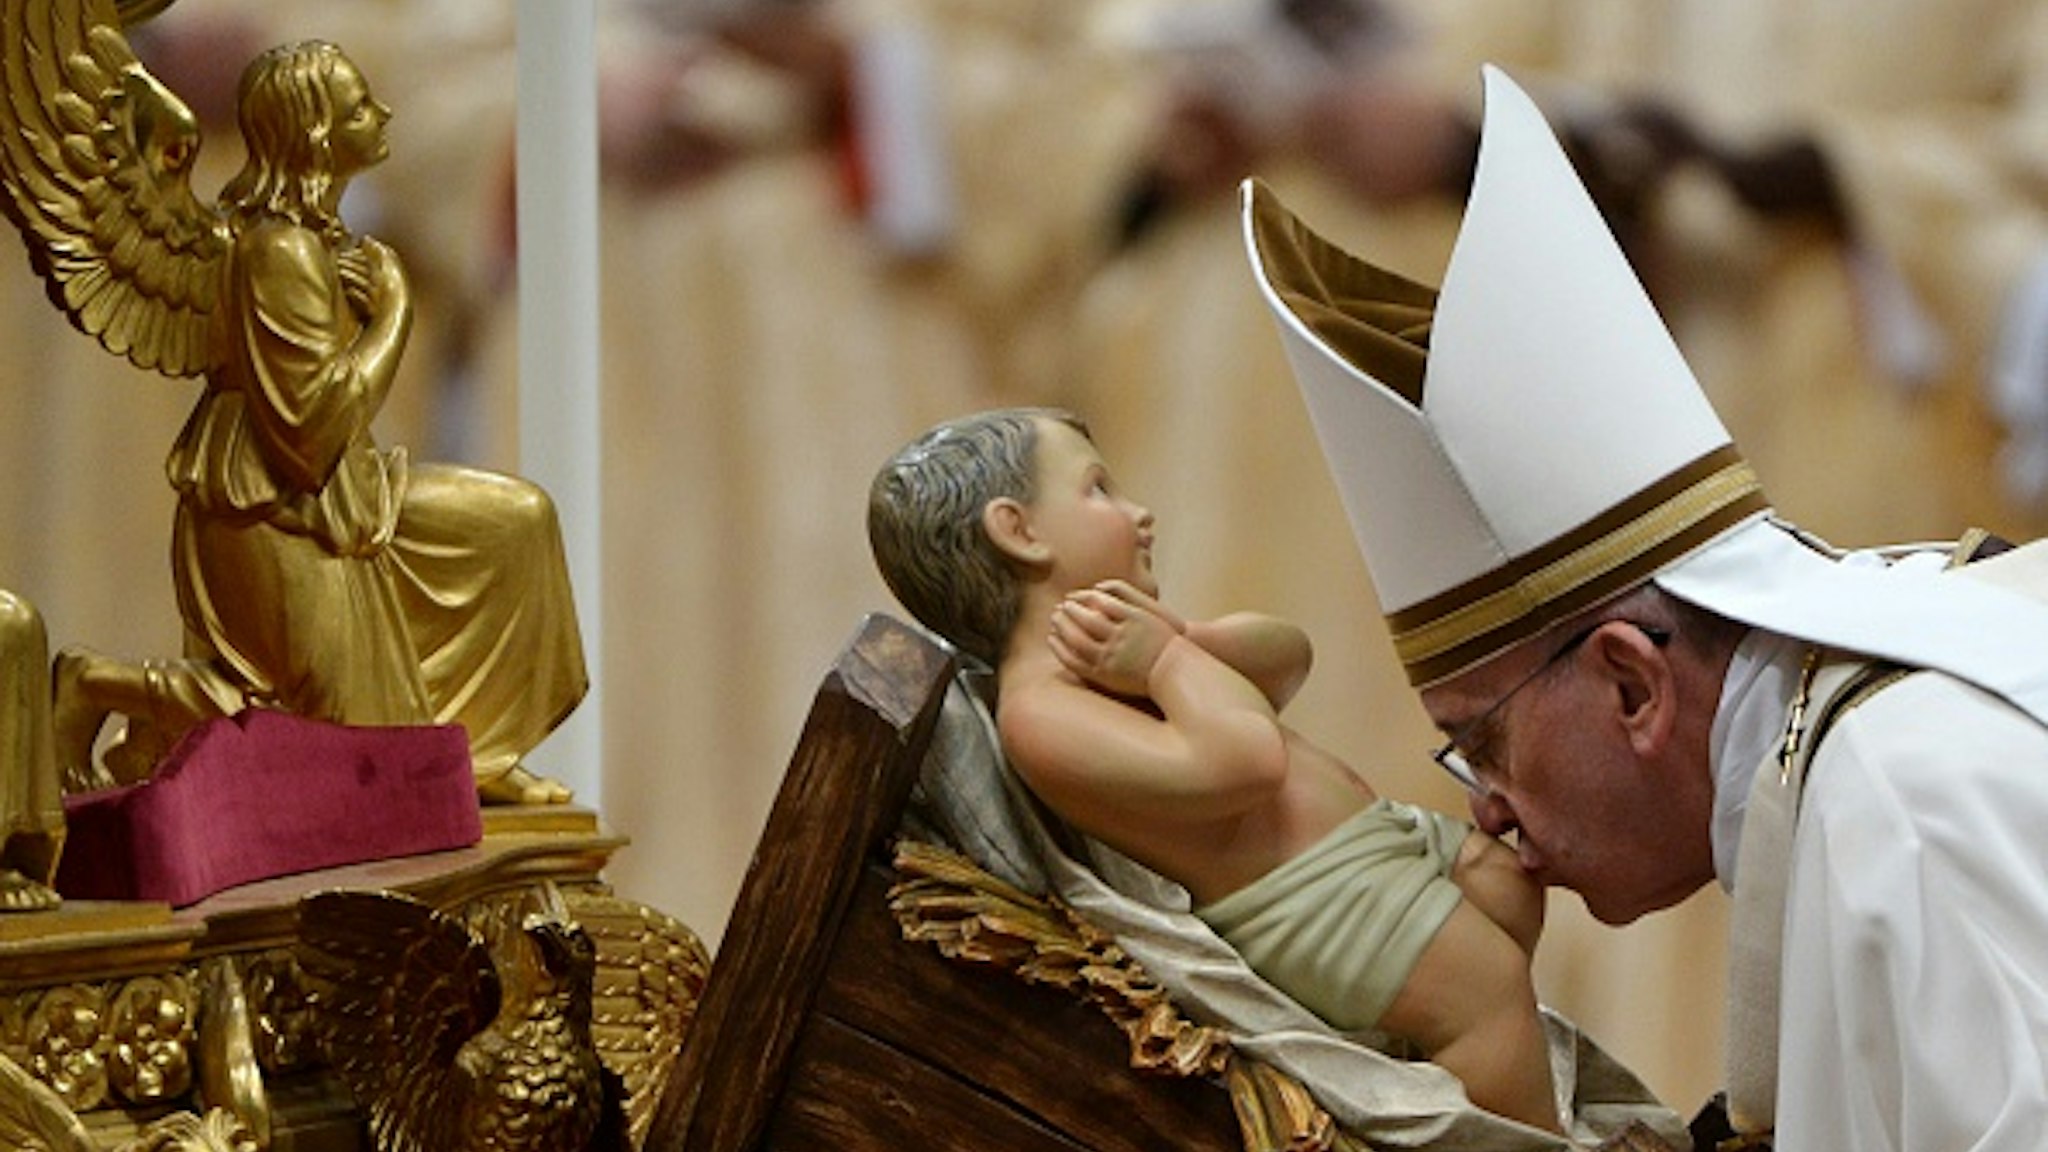 Pope Francis kisses the unveiled baby Jesus during a Christmas Eve mass at St Peter's Basilica to mark the nativity of Jesus Christ, on December 24, 2014 at the Vatican.